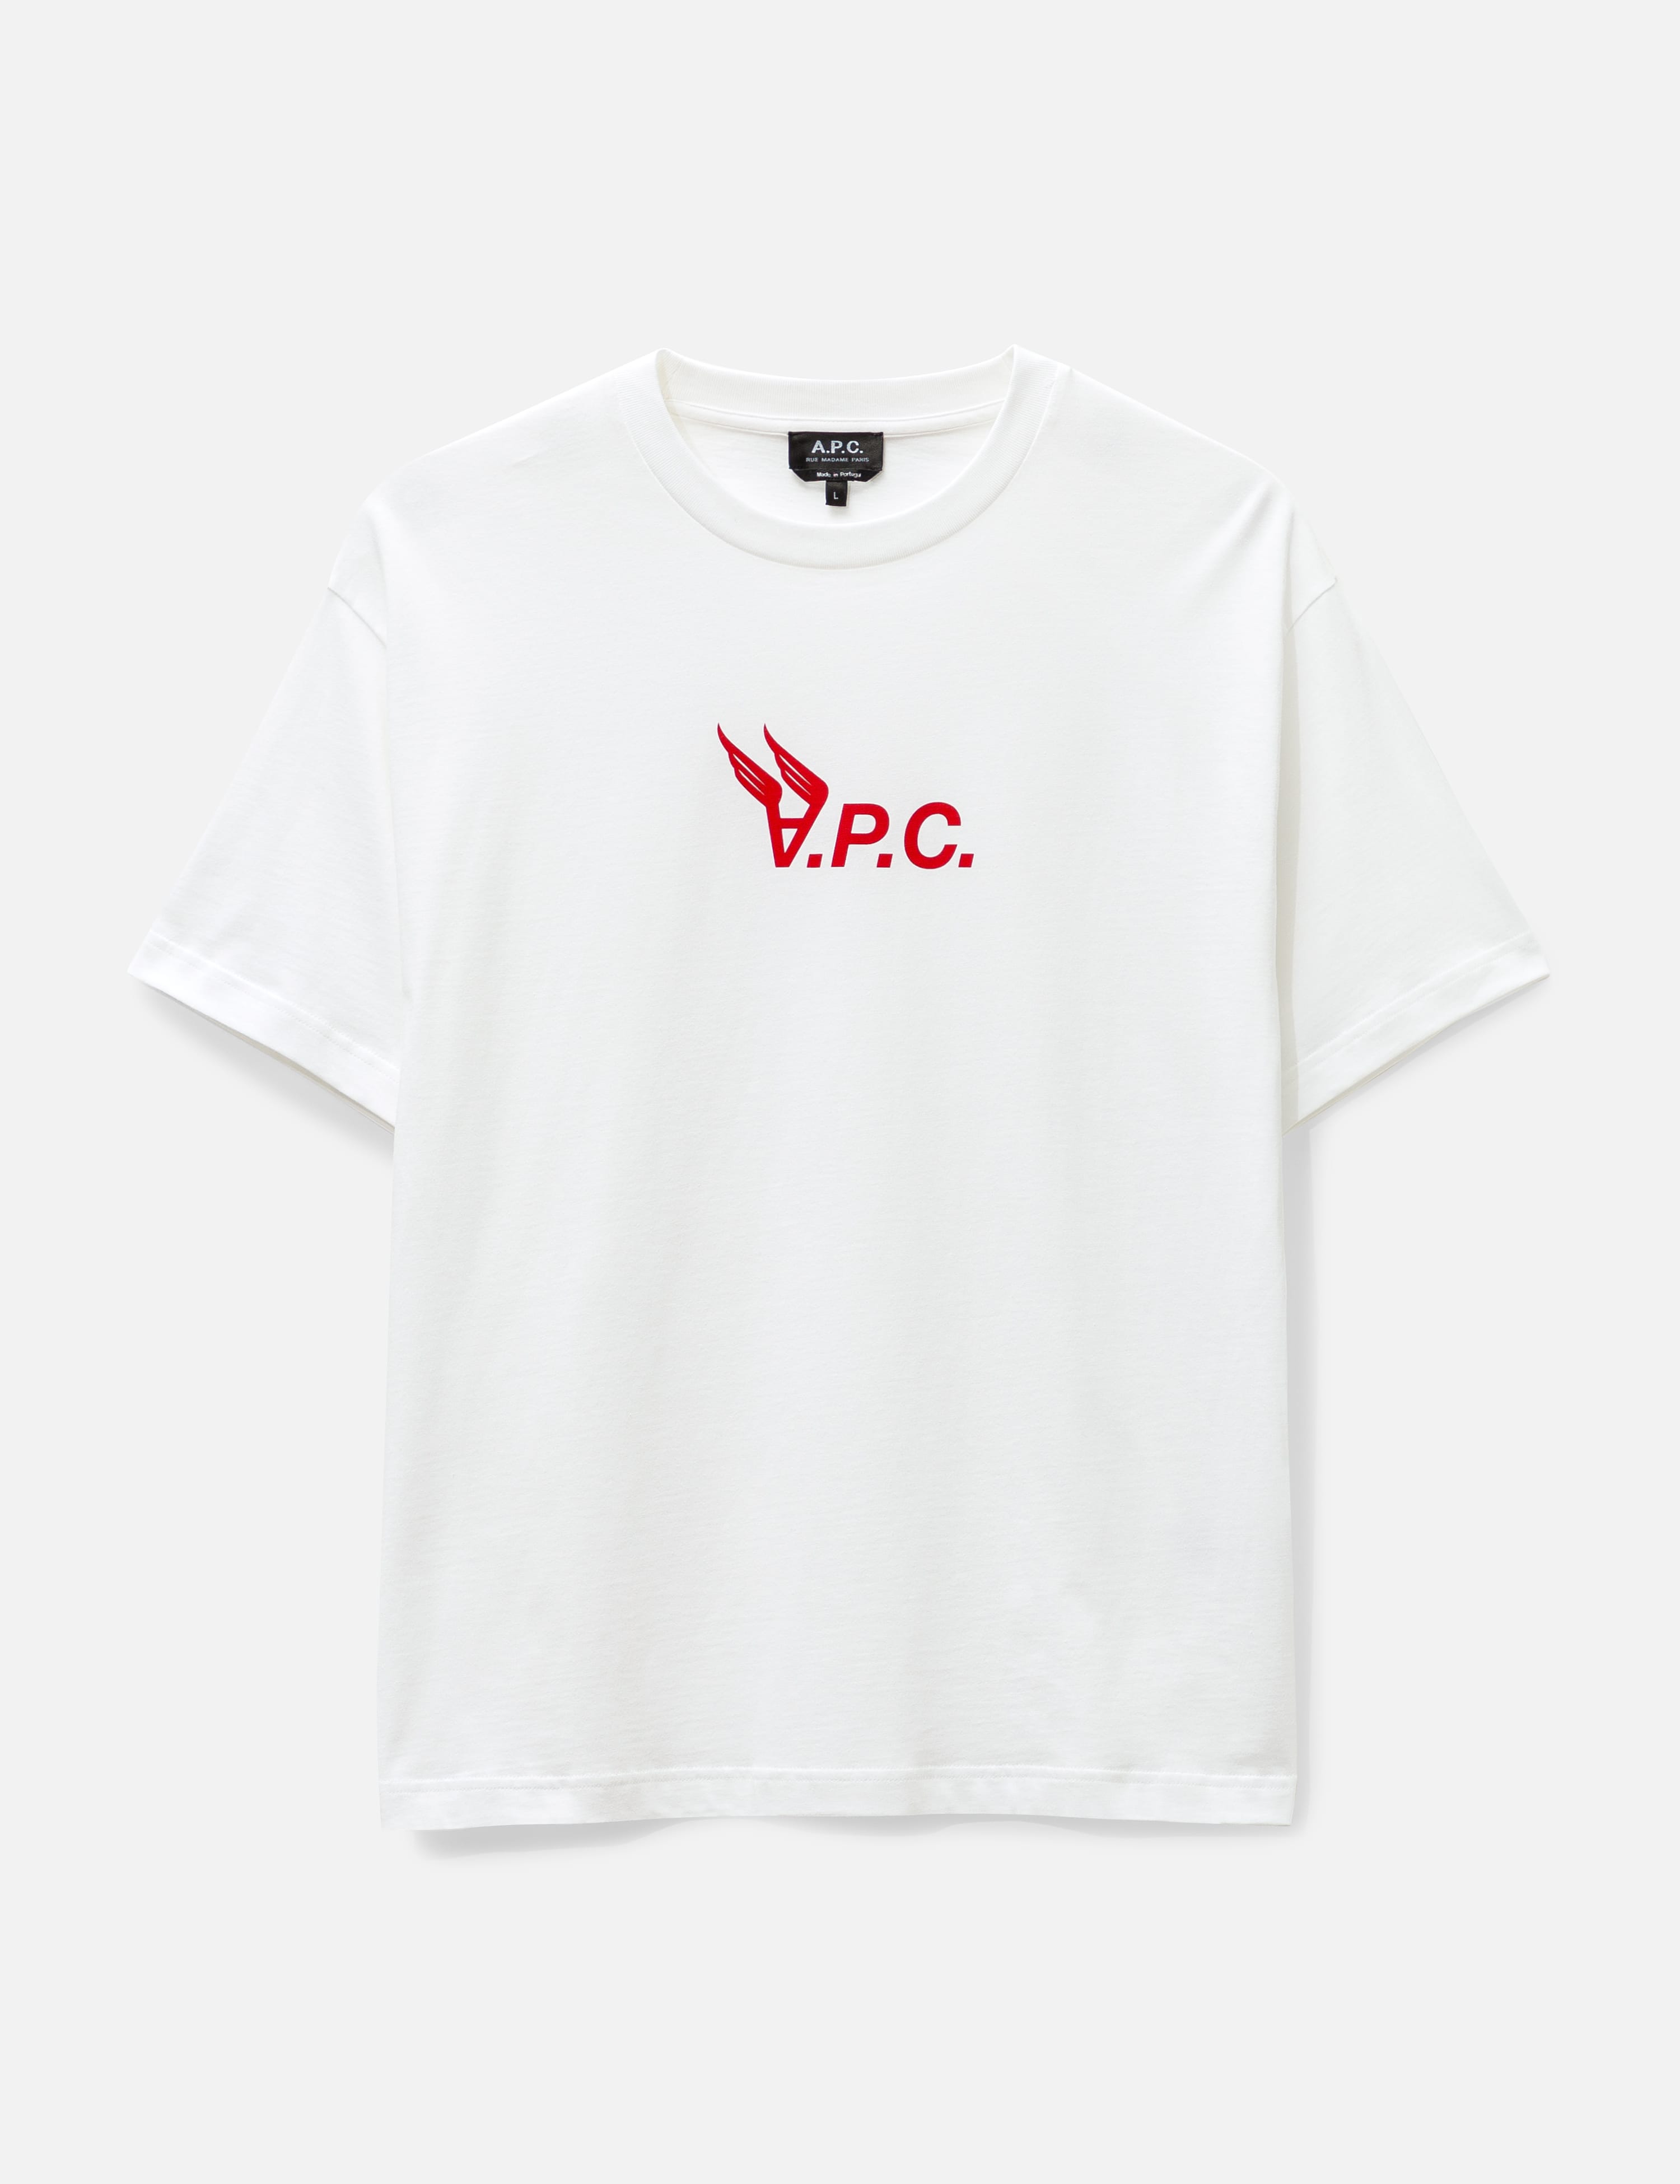 A.P.C. - Hermance T-shirt | HBX - Globally Curated Fashion and